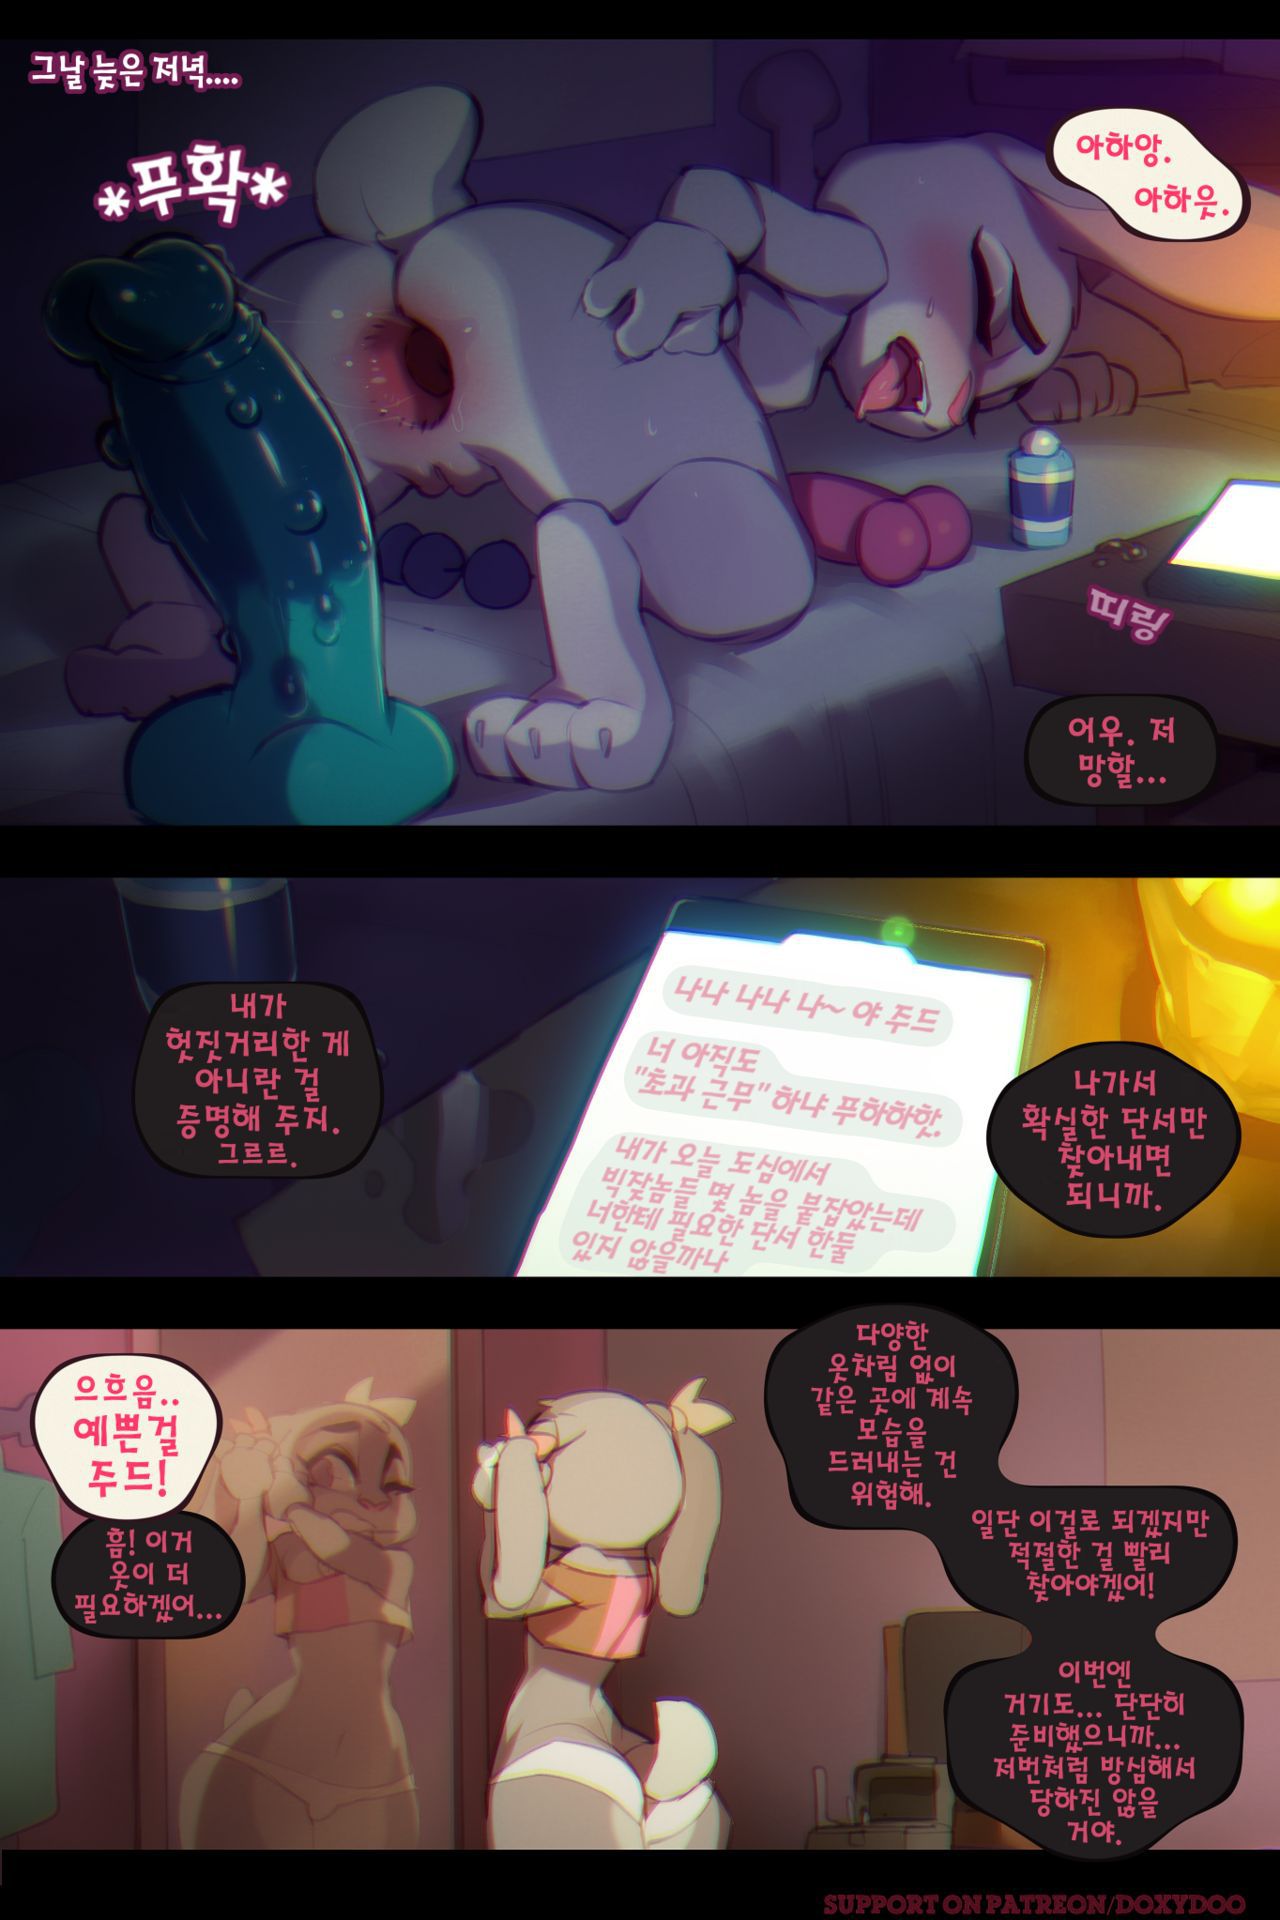 [Doxy] Sweet Sting Part 2: Down The Rabbit Hole | 달콤한 함정수사 2부: 토끼 굴속으로 (Zootopia) [Korean] [Ongoing] 6